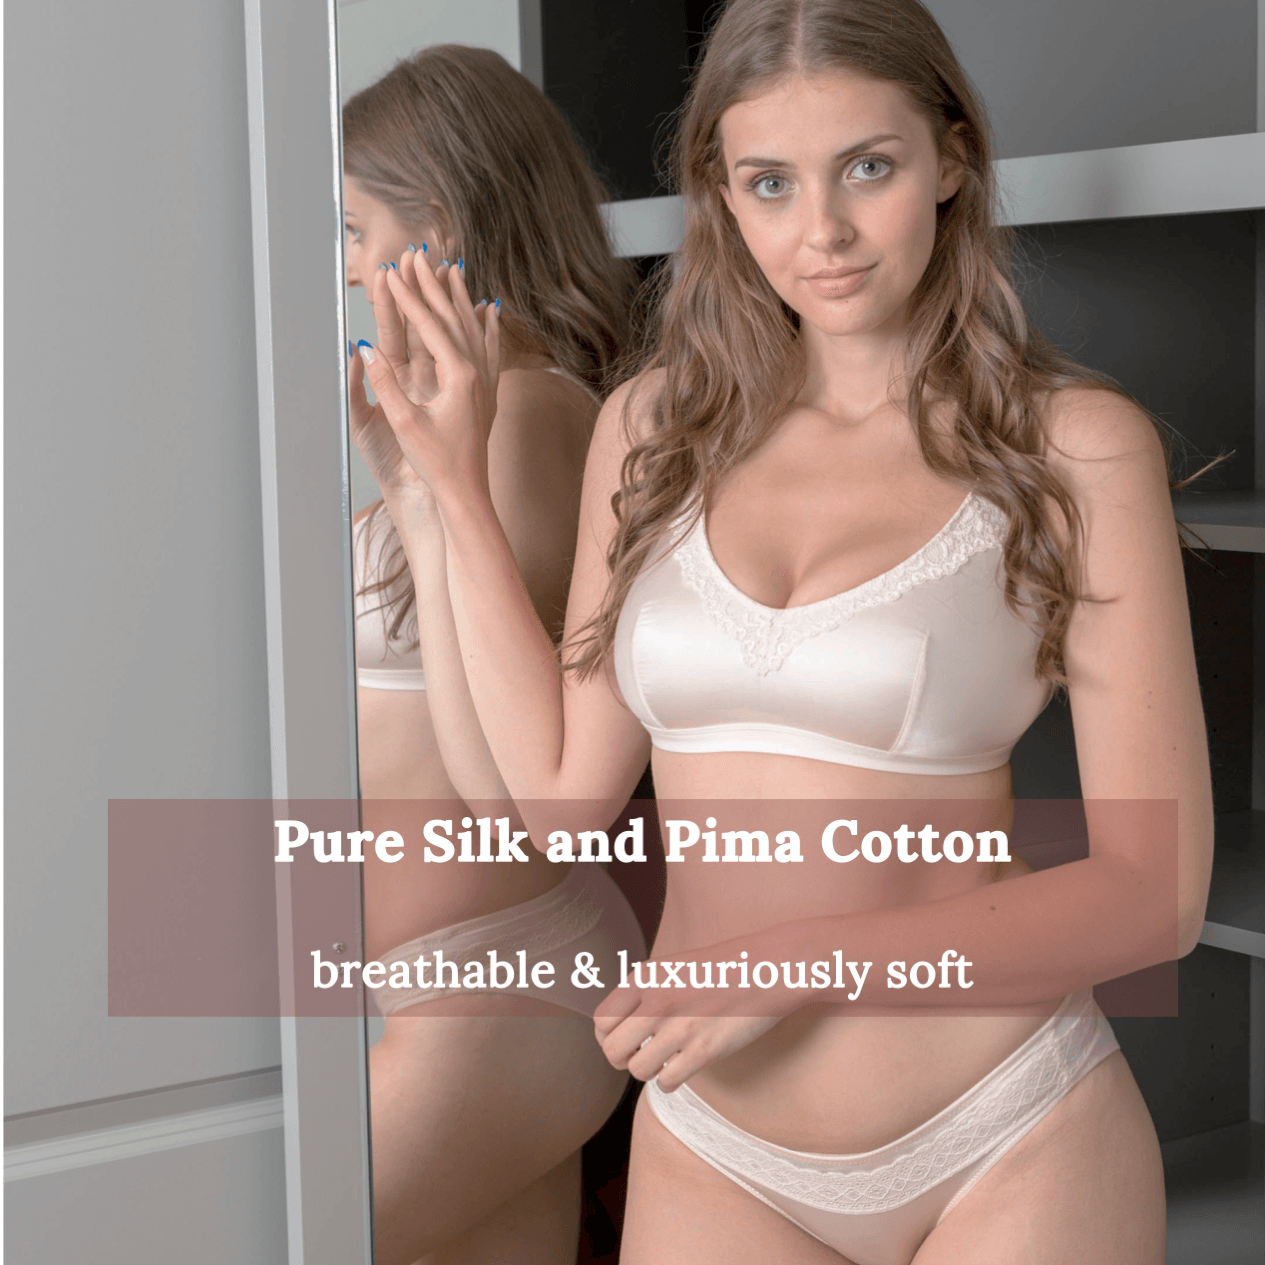 Hypoallergenic Organic Cotton Bra Sets: 7 + 1 Reasons Why You Need These!